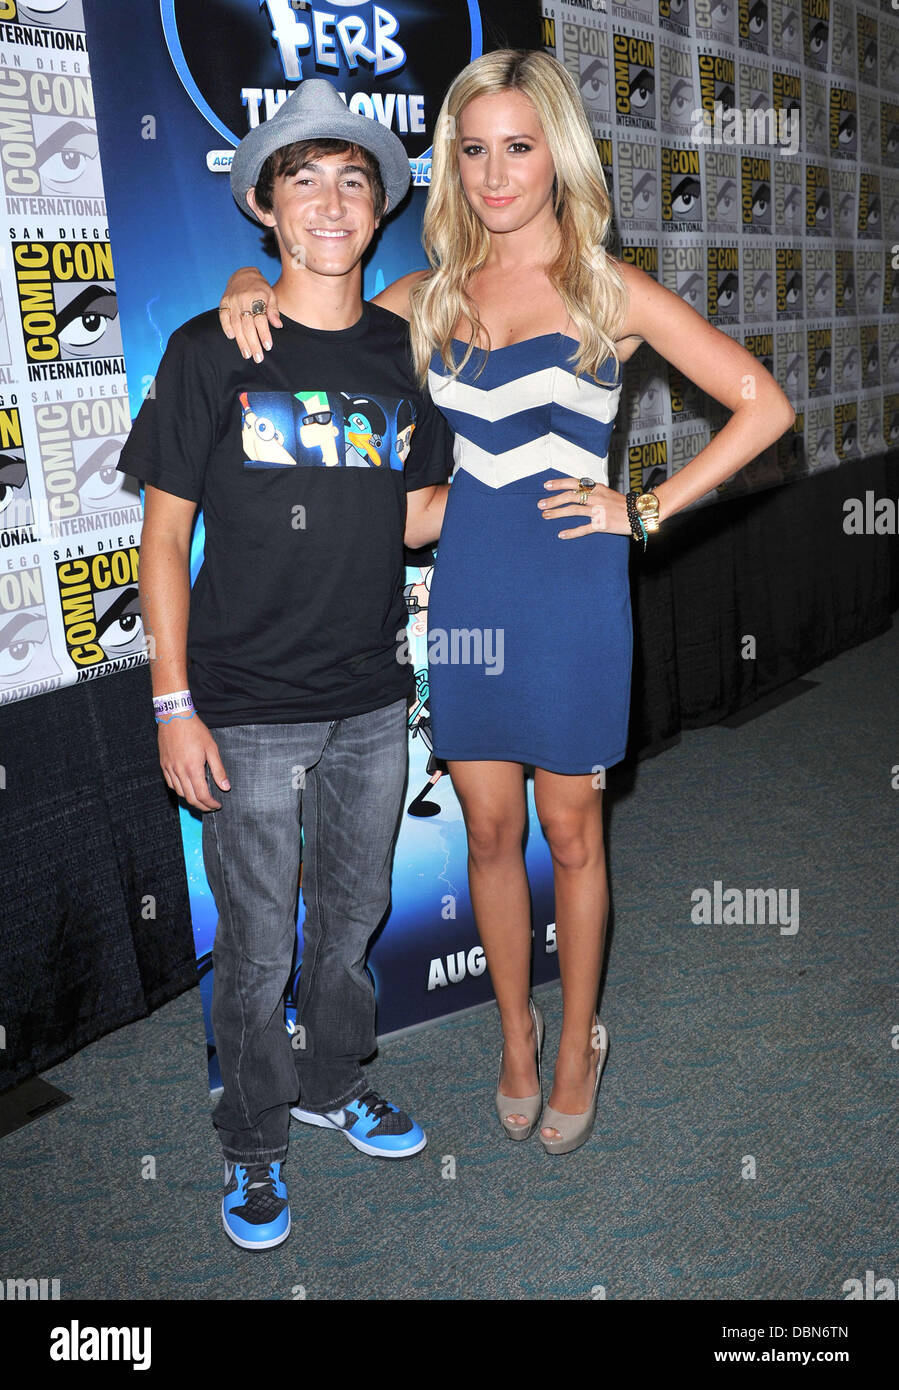 Ashley Tisdale and Vincent Martella 2011 Comic-Con Convention - Day 2 - 'Phineas & Ferb' - Press Conference Los Angeles, California - 22.07.11 Stock Photo